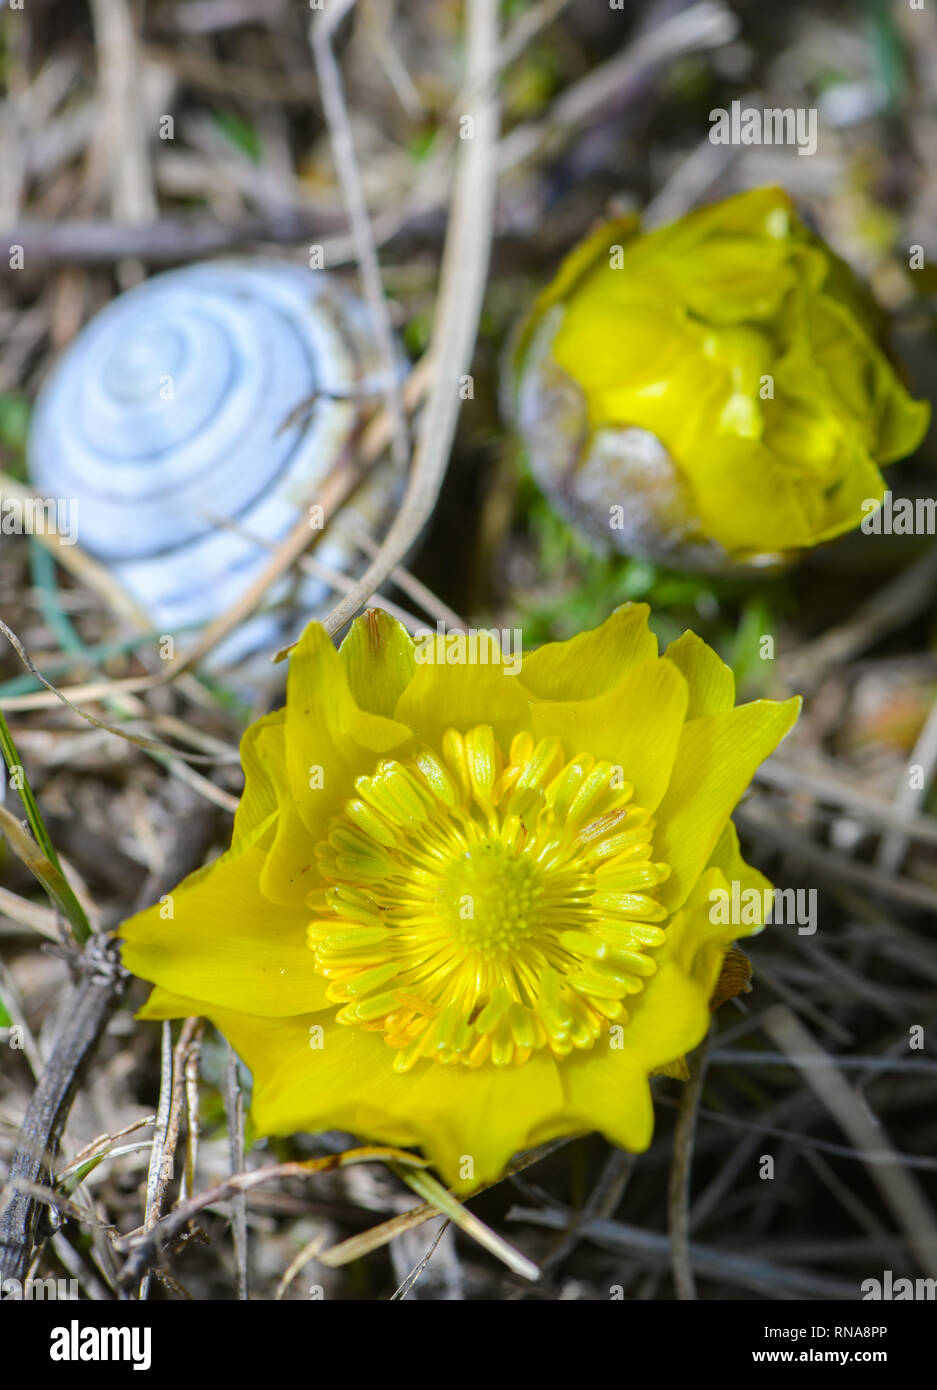 18 February 2019, Brandenburg, Lebus: Two bright yellow Adonisheröschen bloom on the Oder slopes in the Märkisch-Oderland district. An empty snail shell lies next to the two flowers. A lot of sun and mild temperatures of the last days have led to the blooming of the first Adonisheröschen especially early this year. The area between Lebus an der Oder and Mallnow am Oderbruchrand in East Brandenburg is one of the largest contiguous areas of Adonisheröschen in Europe. In Brandenburg, these strictly protected types occur only at the Pontischen slopes north of Frankfurt (Oder). For the poisonous fl Stock Photo